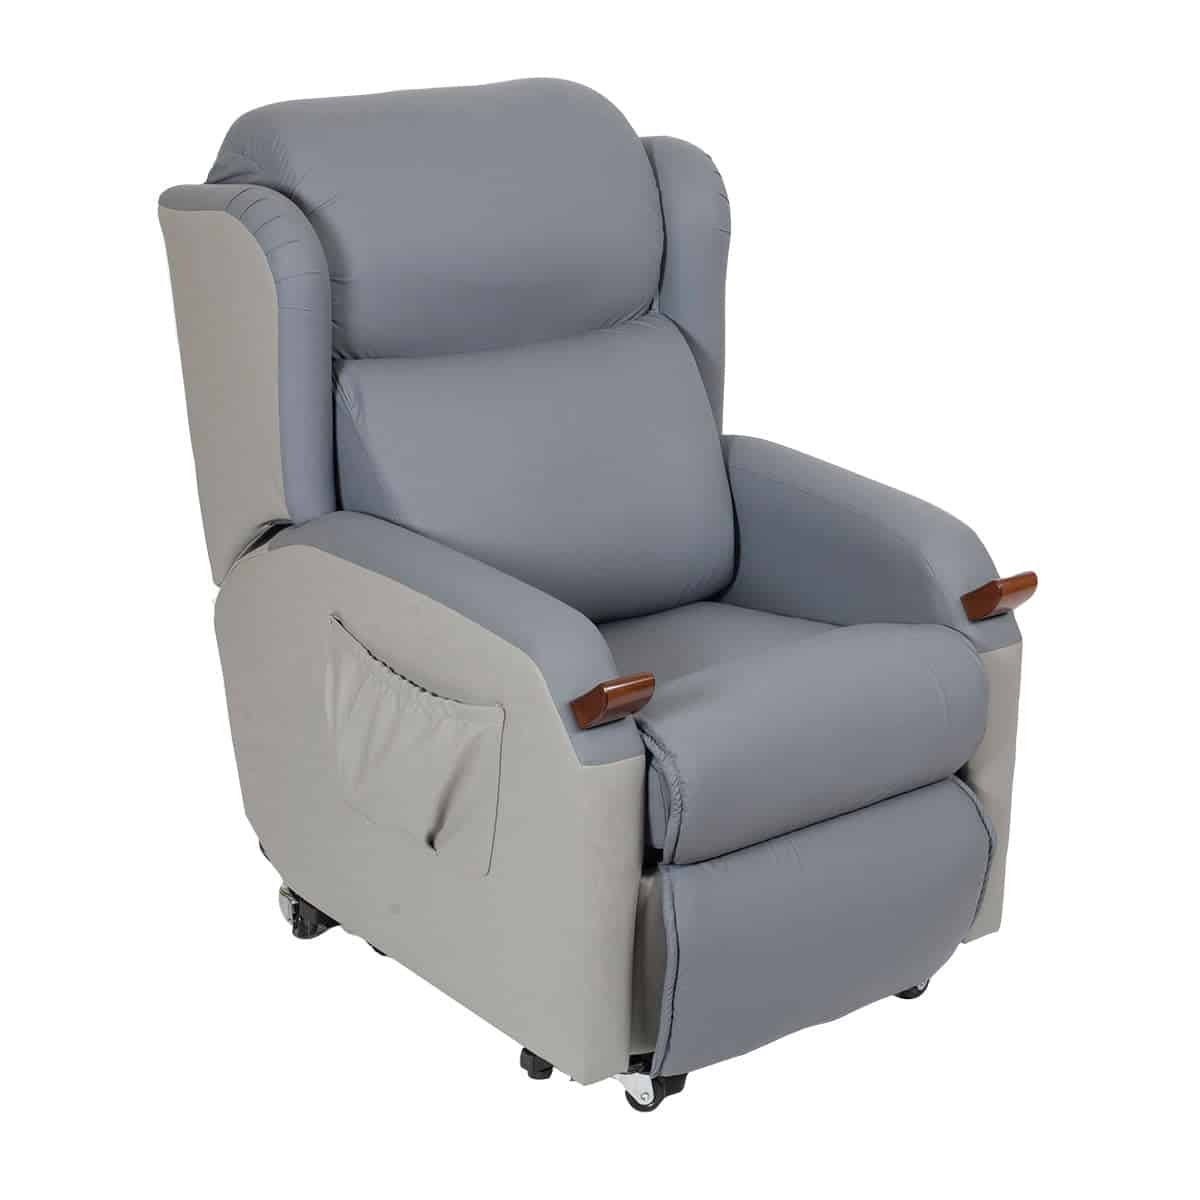 Air Comfort Compact Lift Chair – Single Motor – For Hire